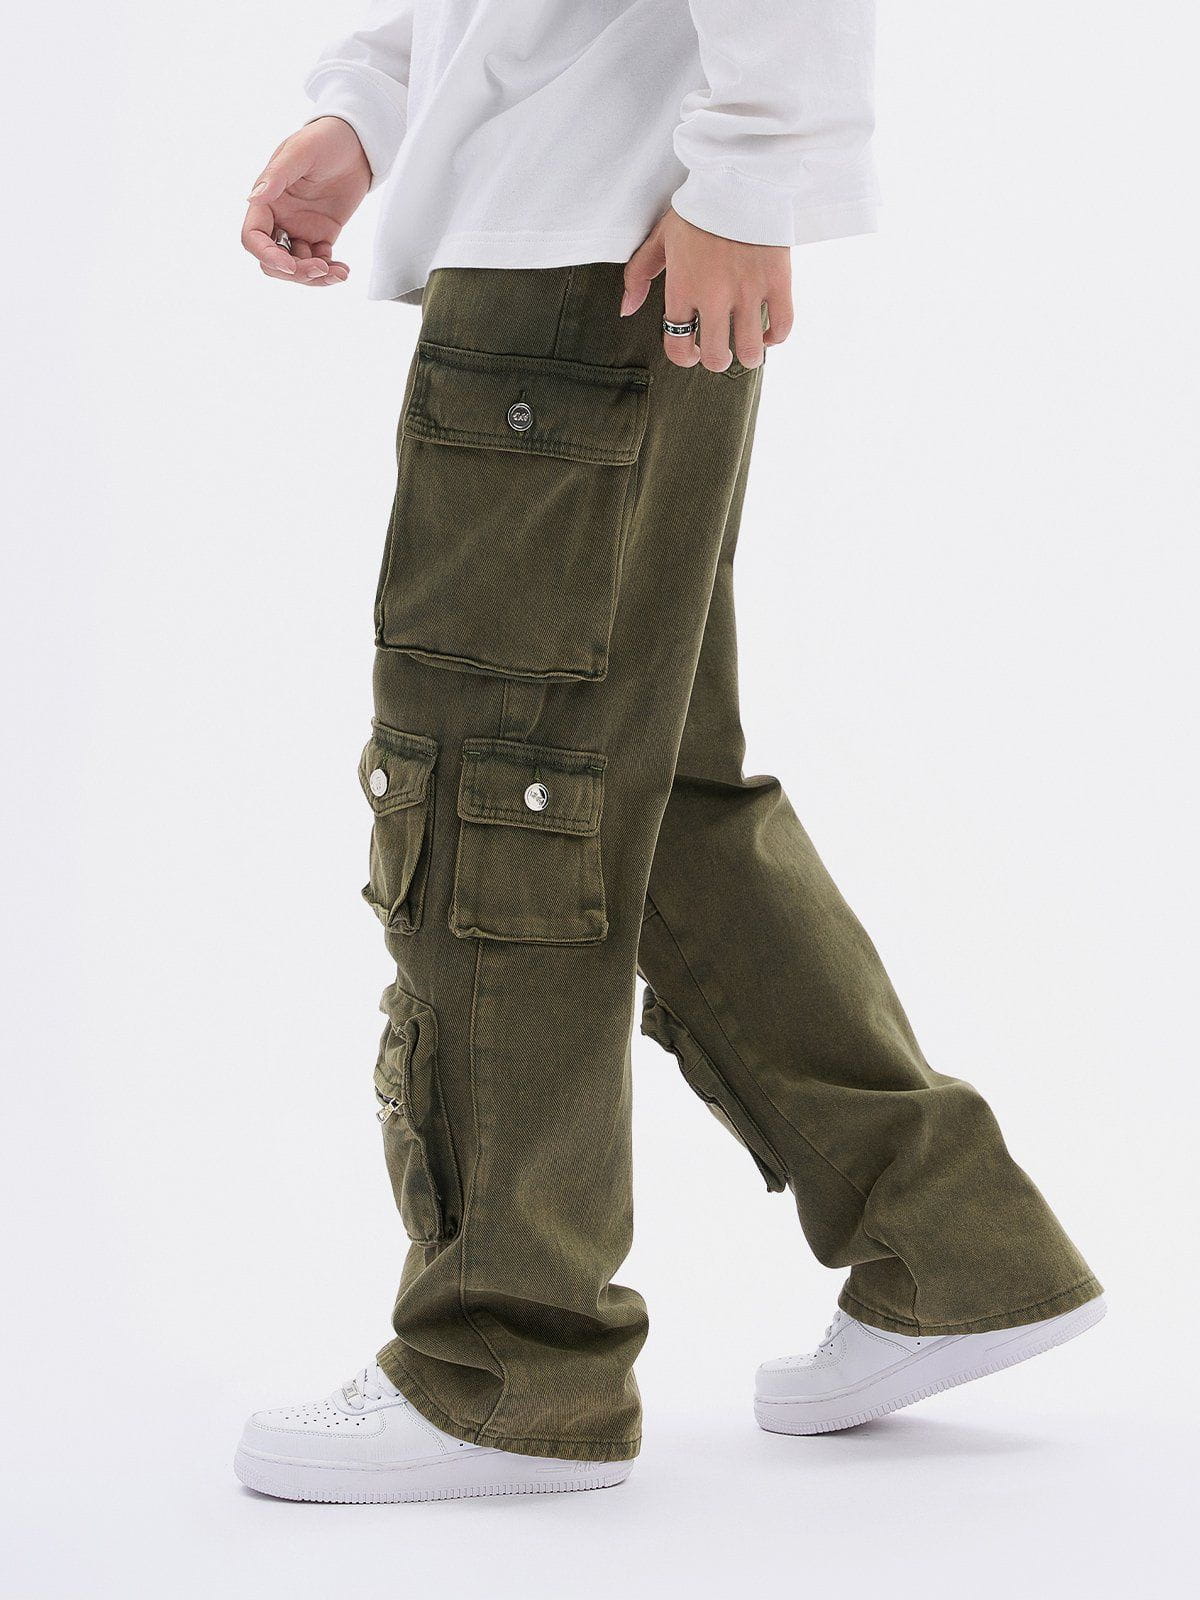 FIVEKOH Galaxy collection washed pants - デニム/ジーンズ